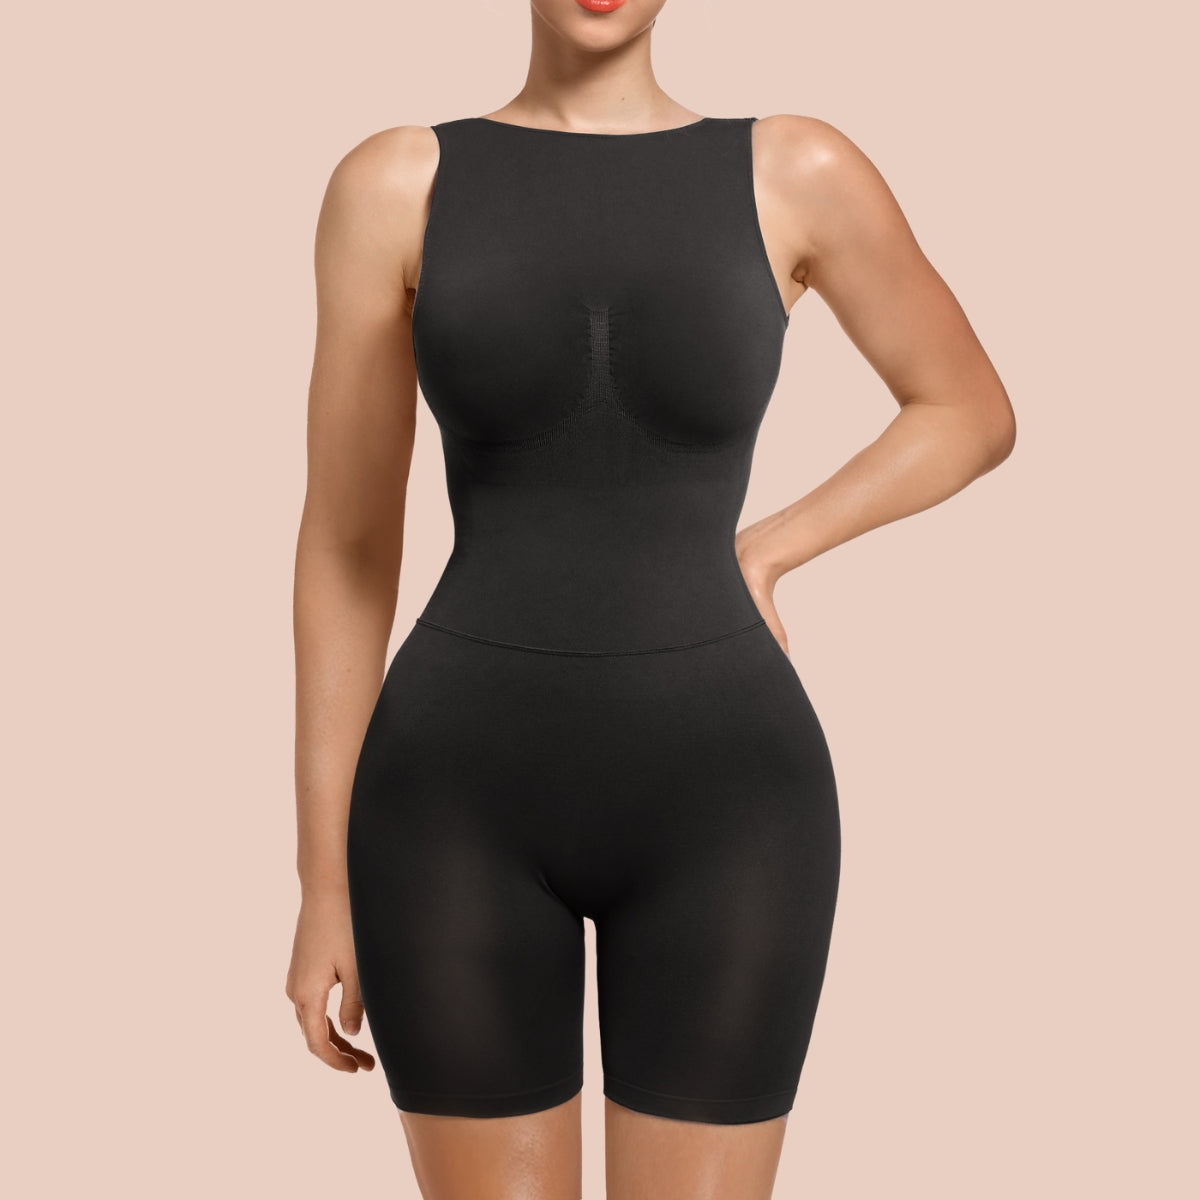  Solid Super Fitting Thick Chick Jumpsuit Romper Body  Shaper Pants Onesie –